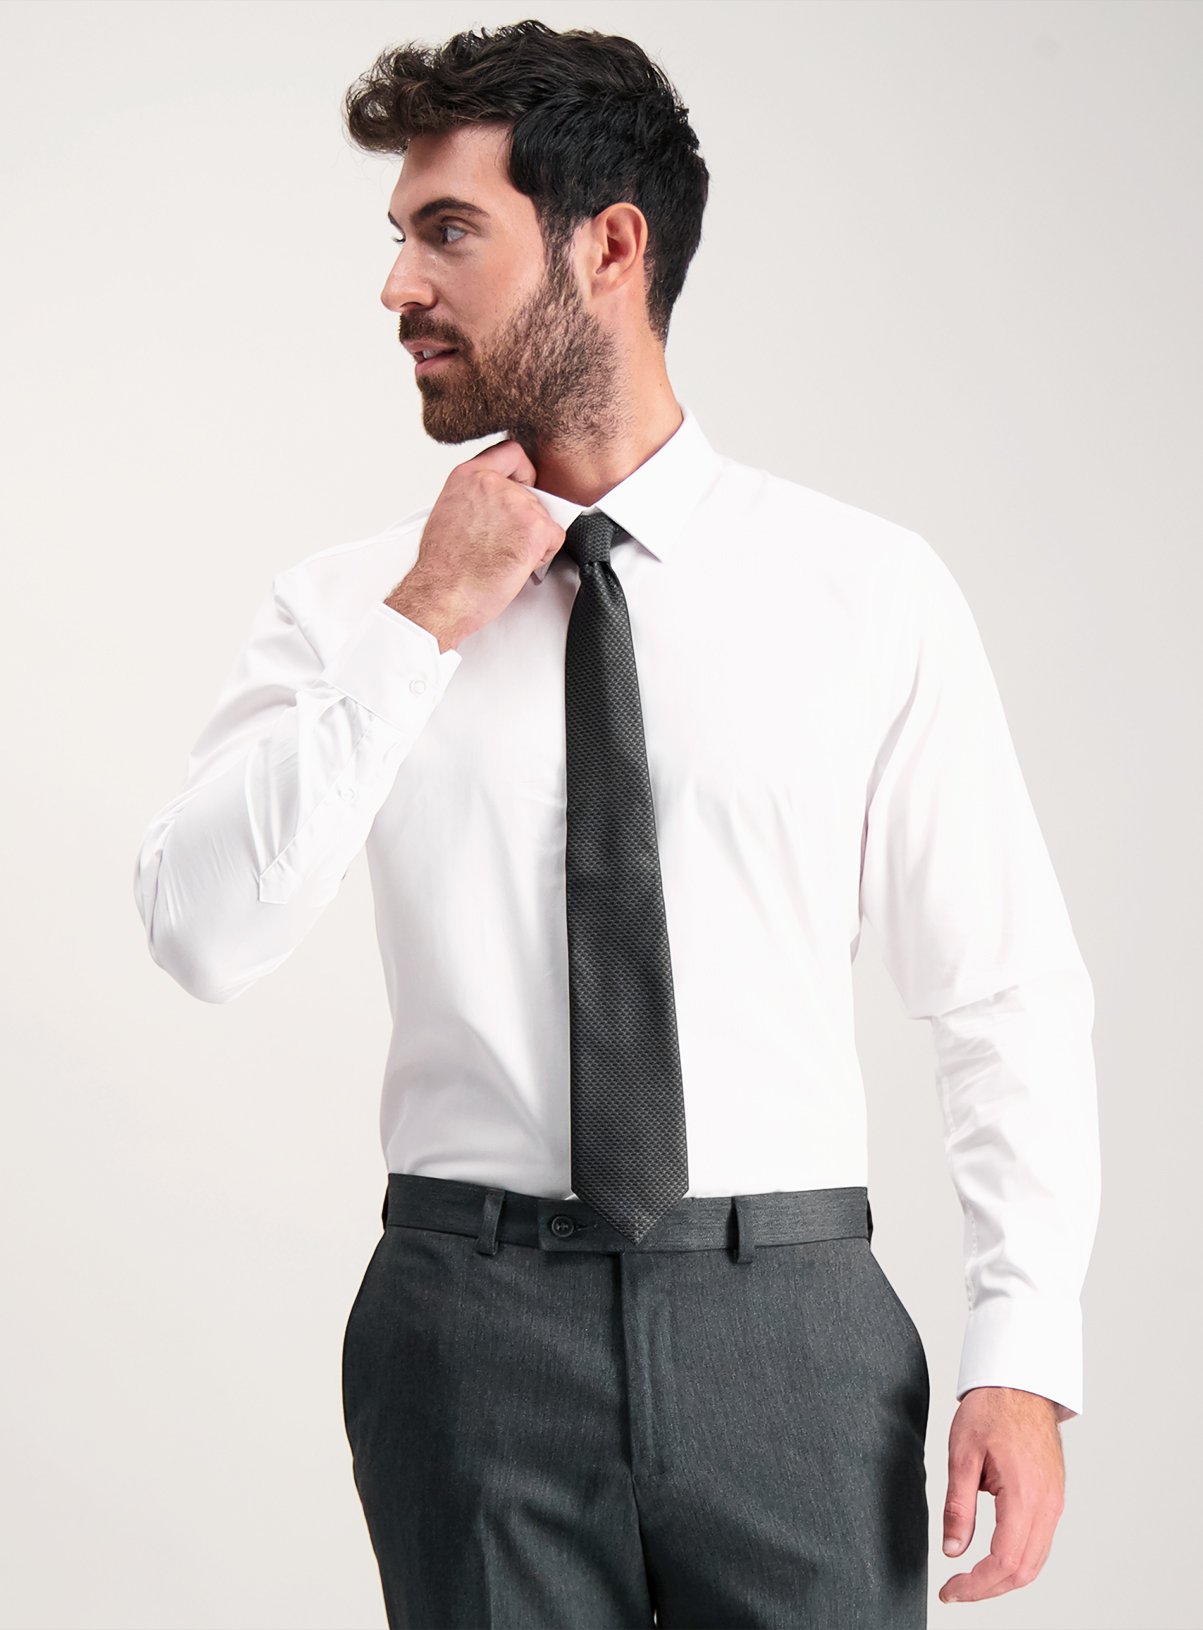 White Tailored Fit Easy Iron Shirt & Black Tie Set Review